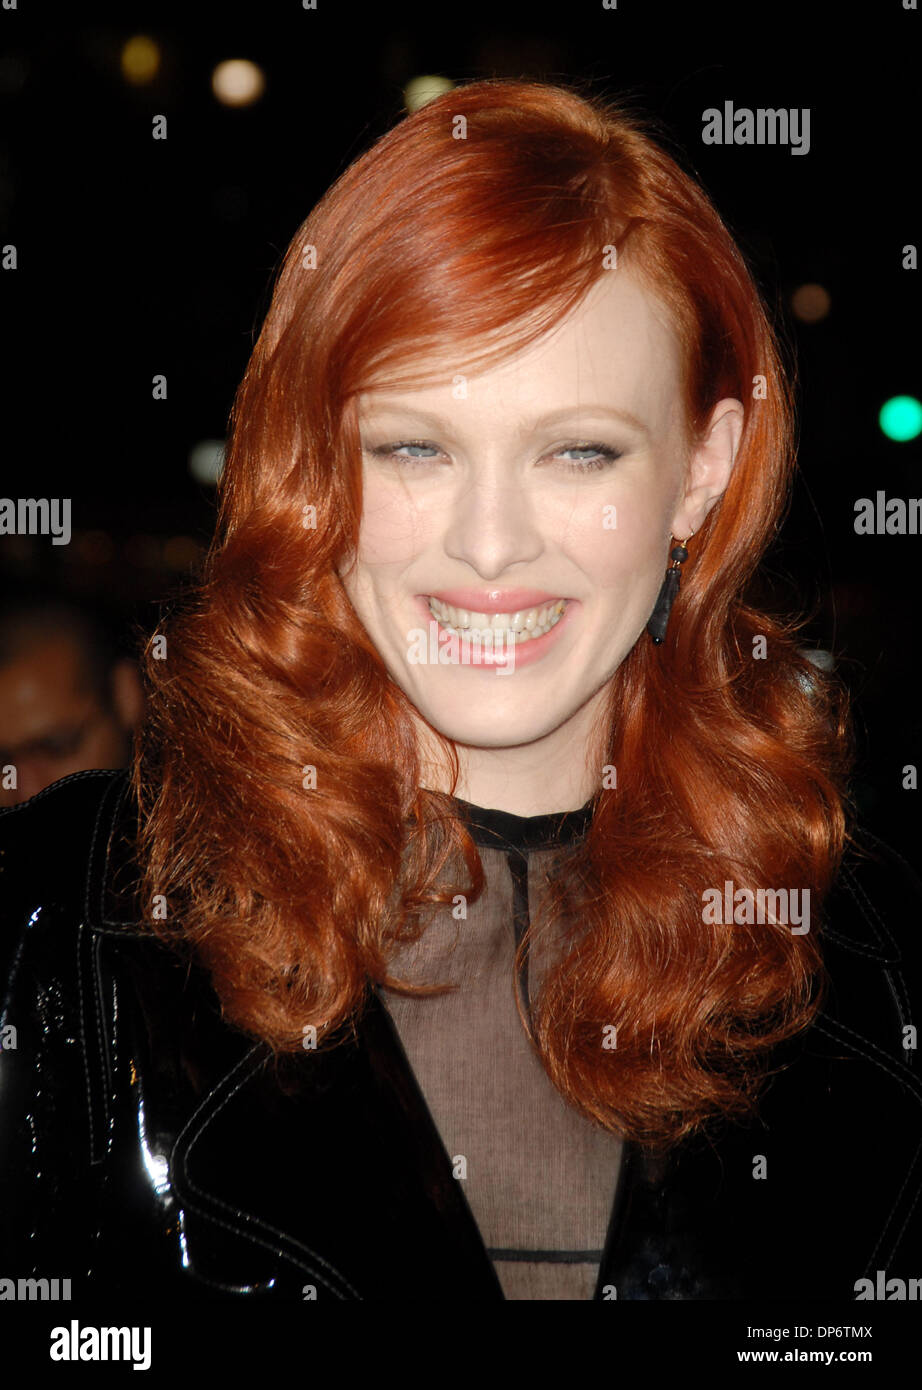 Oct 26, 2006; New York, NY, USA; KAREN ELSON at the Fashion Group's 23rd  Annual Night of Stars which took place at Cipriani's. Mandatory Credit: Photo by Dan Herrick/ZUMA KPA. (©) Copyright 2006 by Dan Herrick Stock Photo